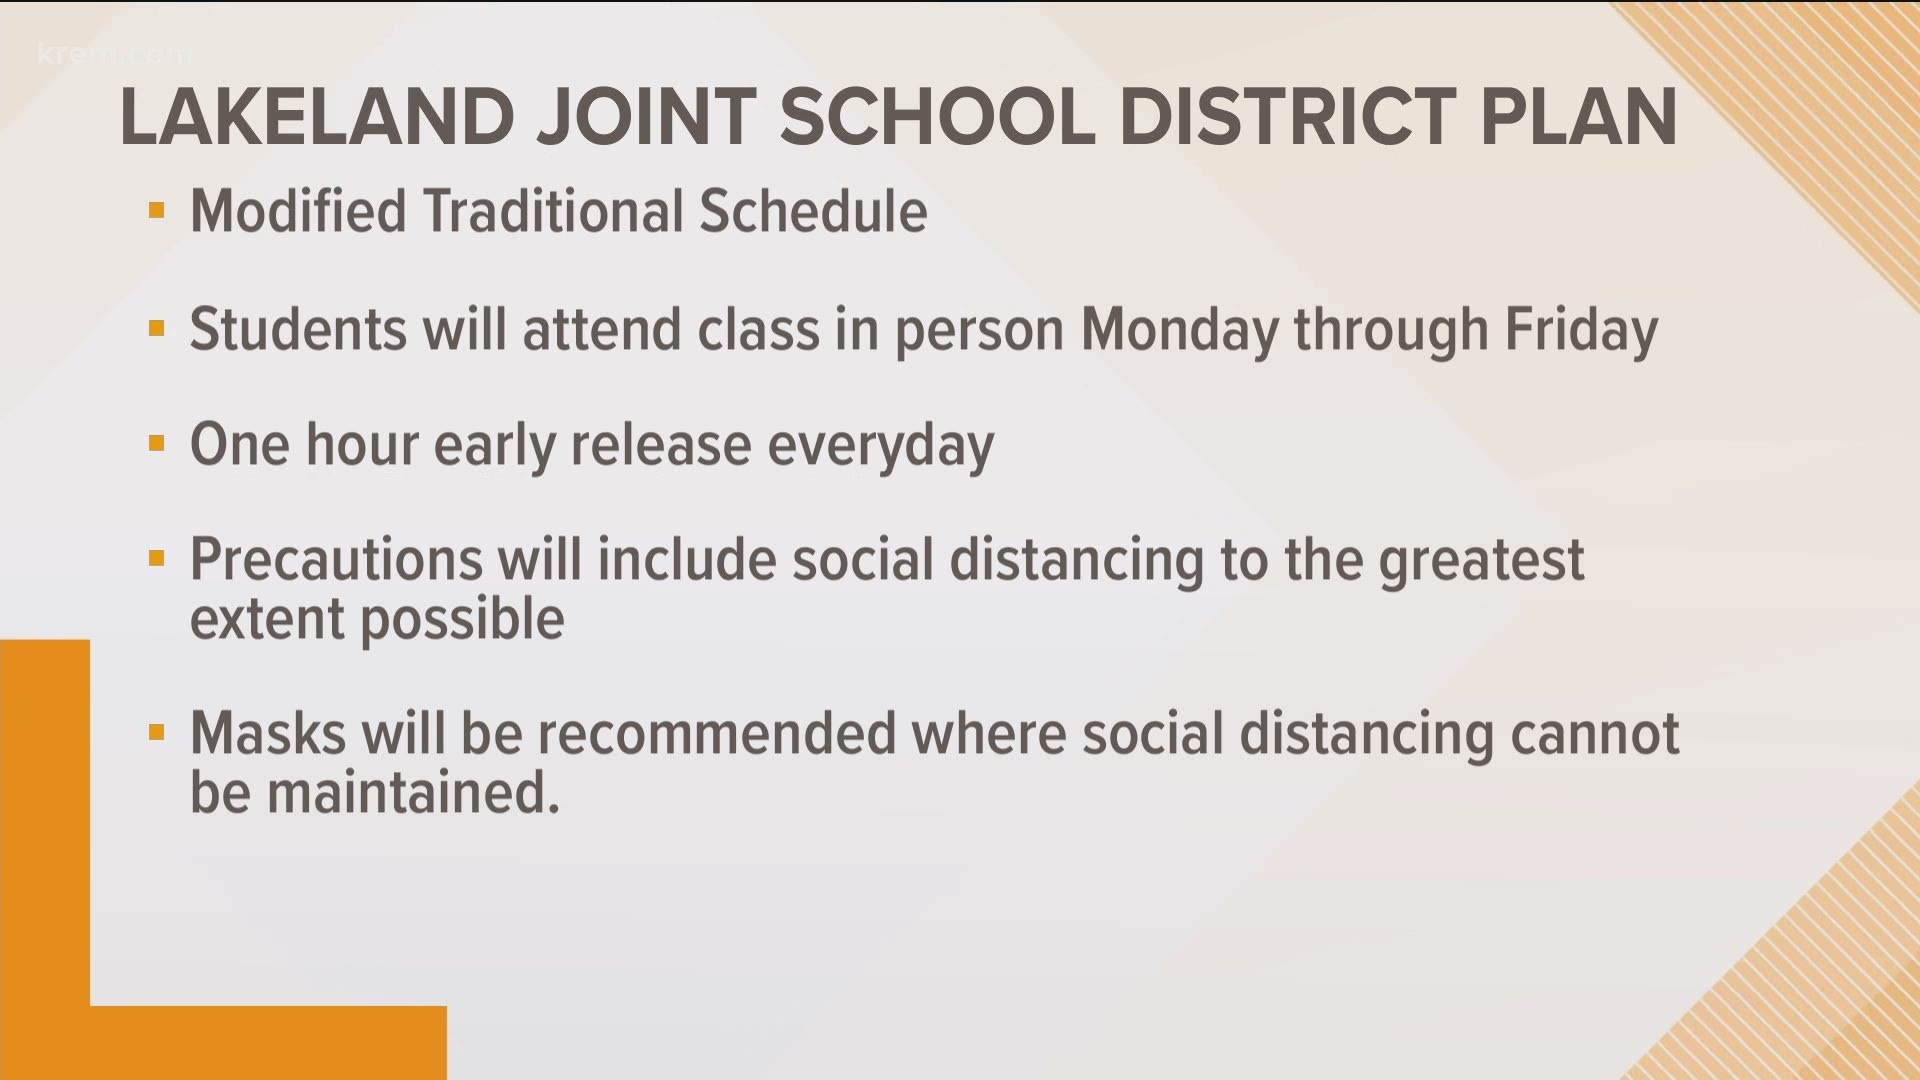 The School District shifted into Yellow mode just before school was set to start on September 8, which involves bringing students back for in-person learning.